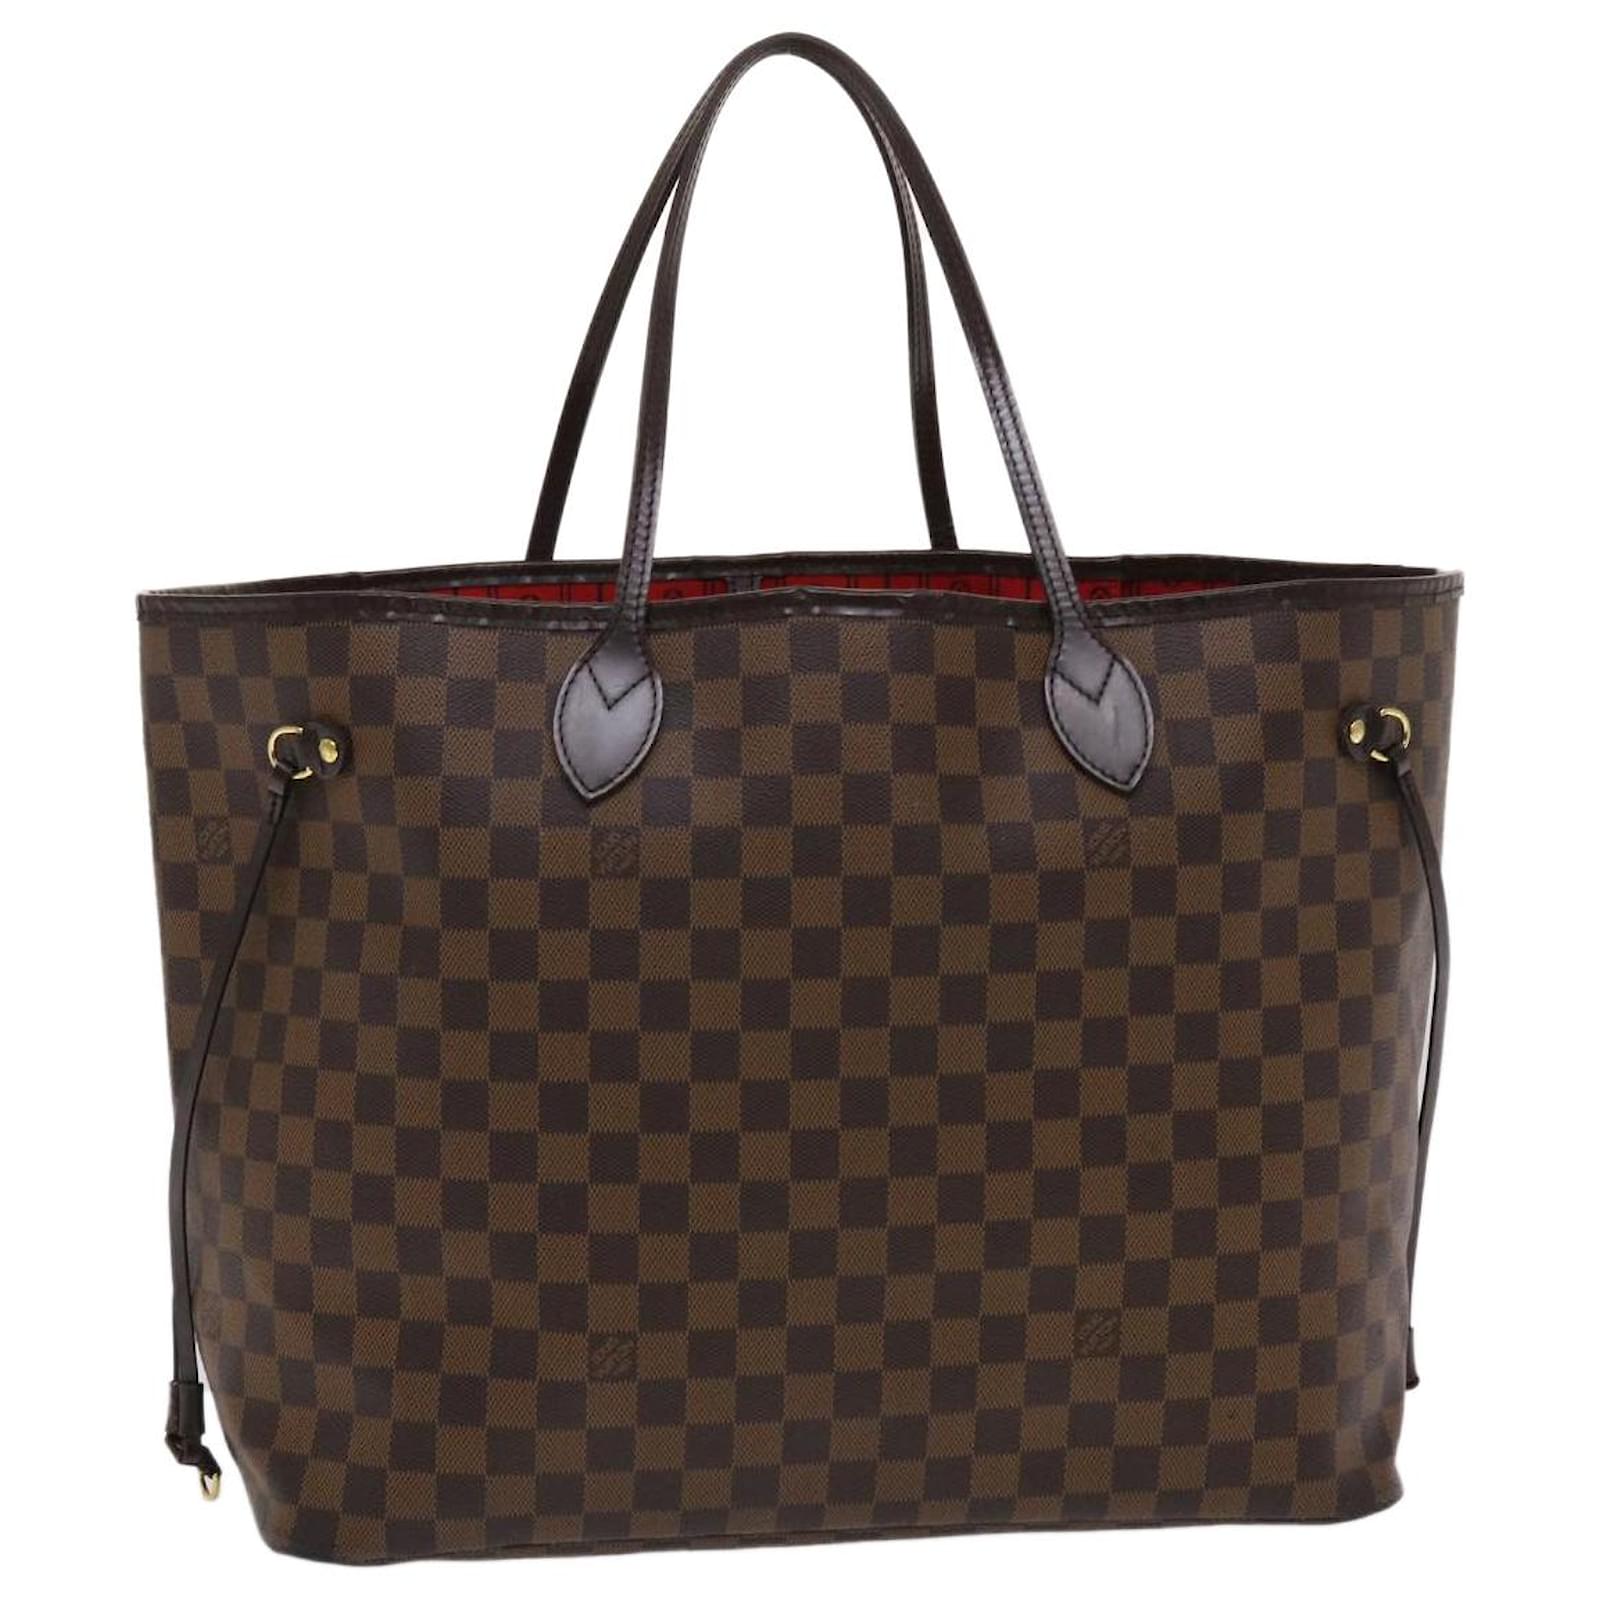 gm neverfull size